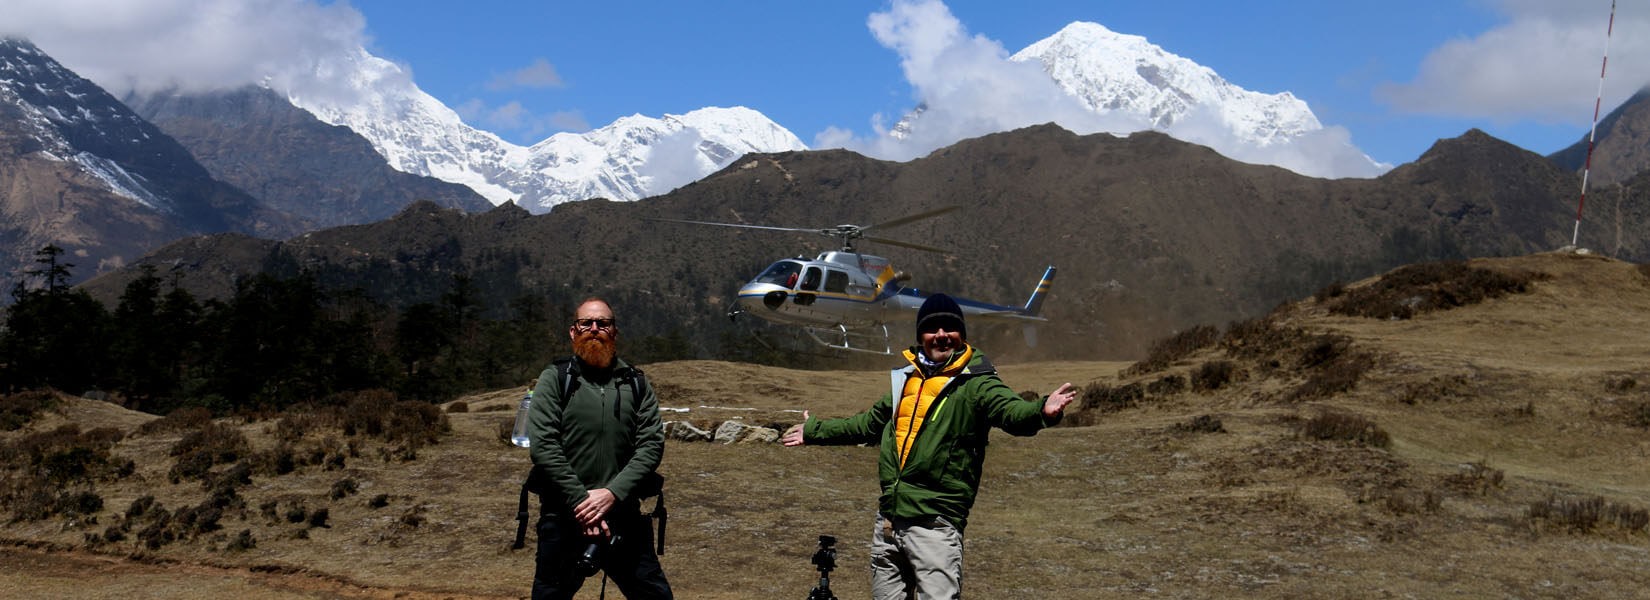 Everest base camp helicopter tour | Heli Tour